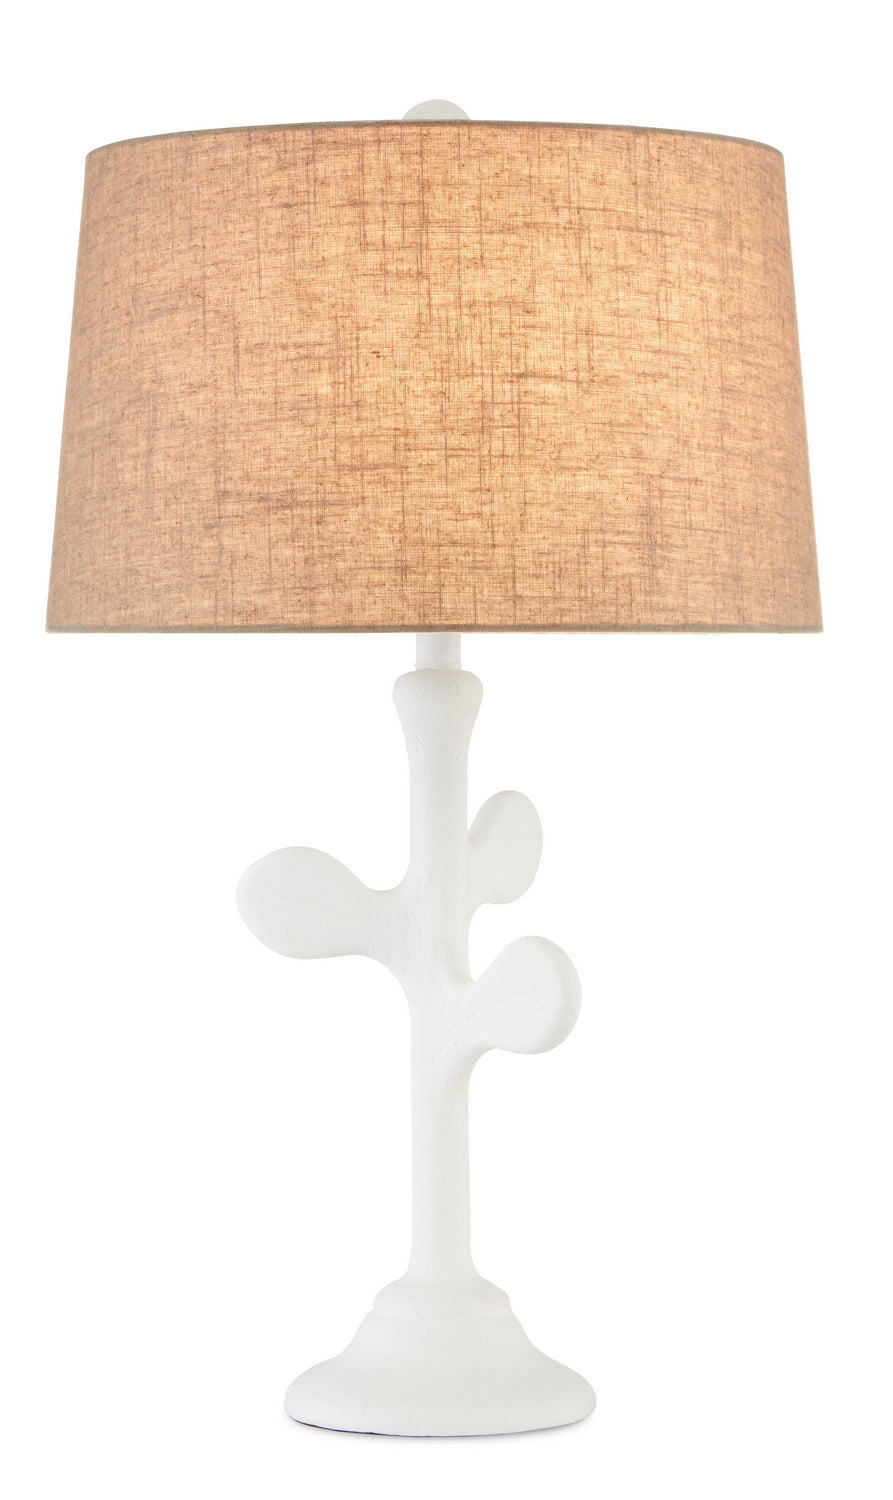 One Light Table Lamp from the Charny collection in White Gesso finish